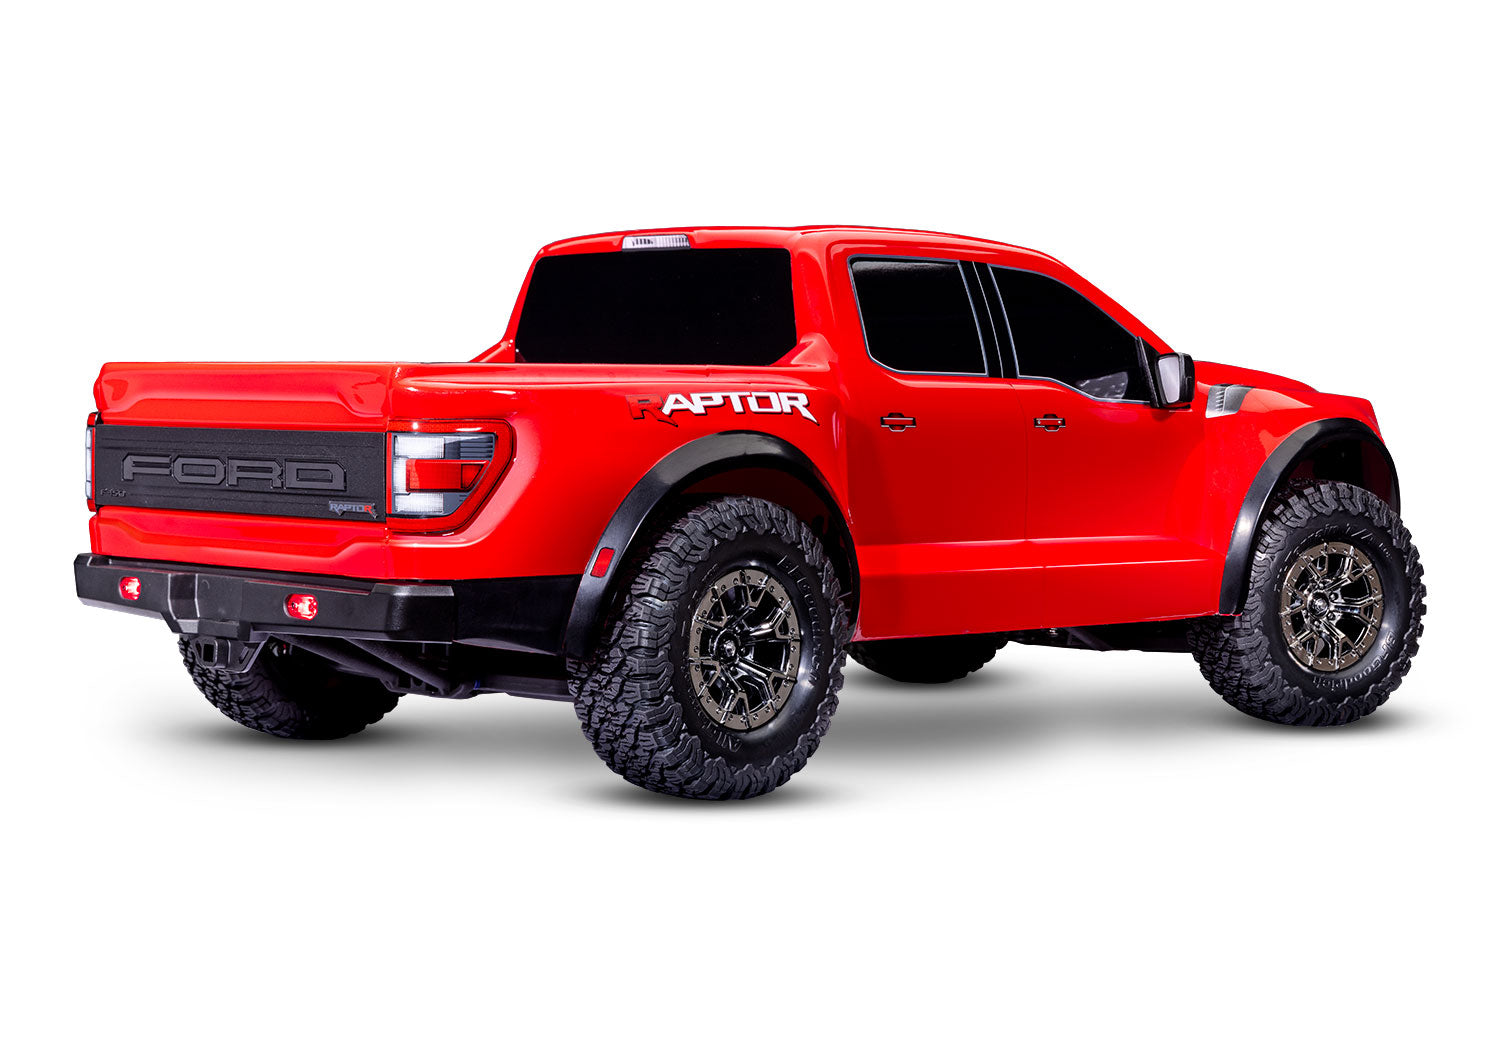 Ford Raptor R: 4X4 VXL 1/10 Scale 4X4 Brushless Replica Truck RED